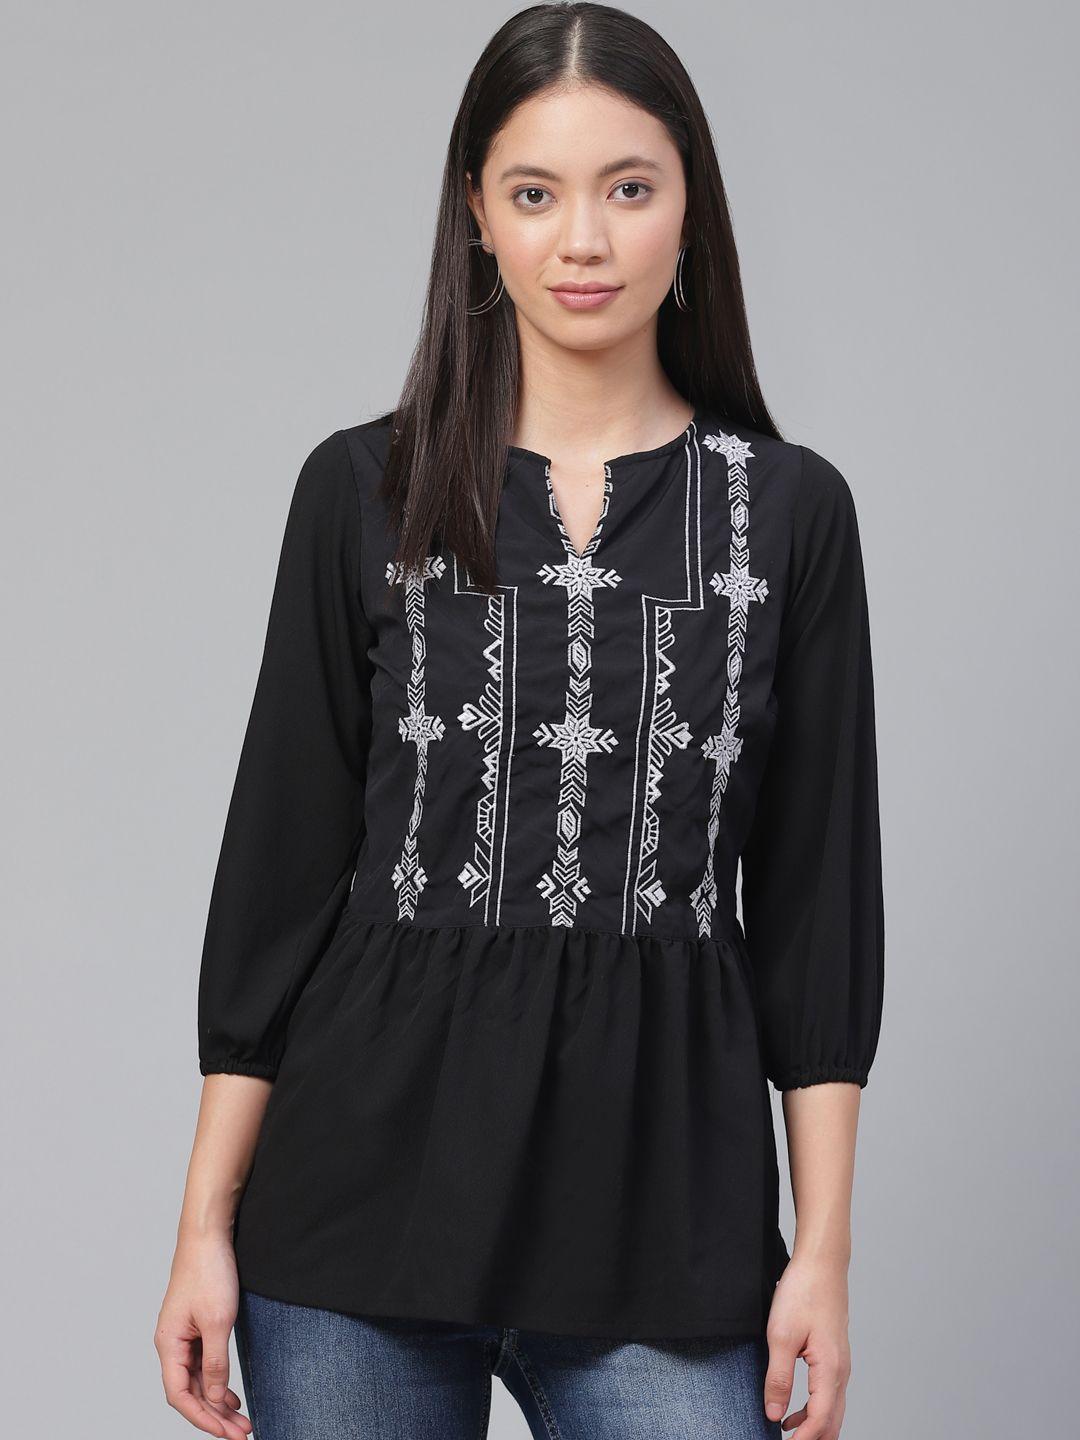 pluss-women-black-&-white-embroidered-a-line-top